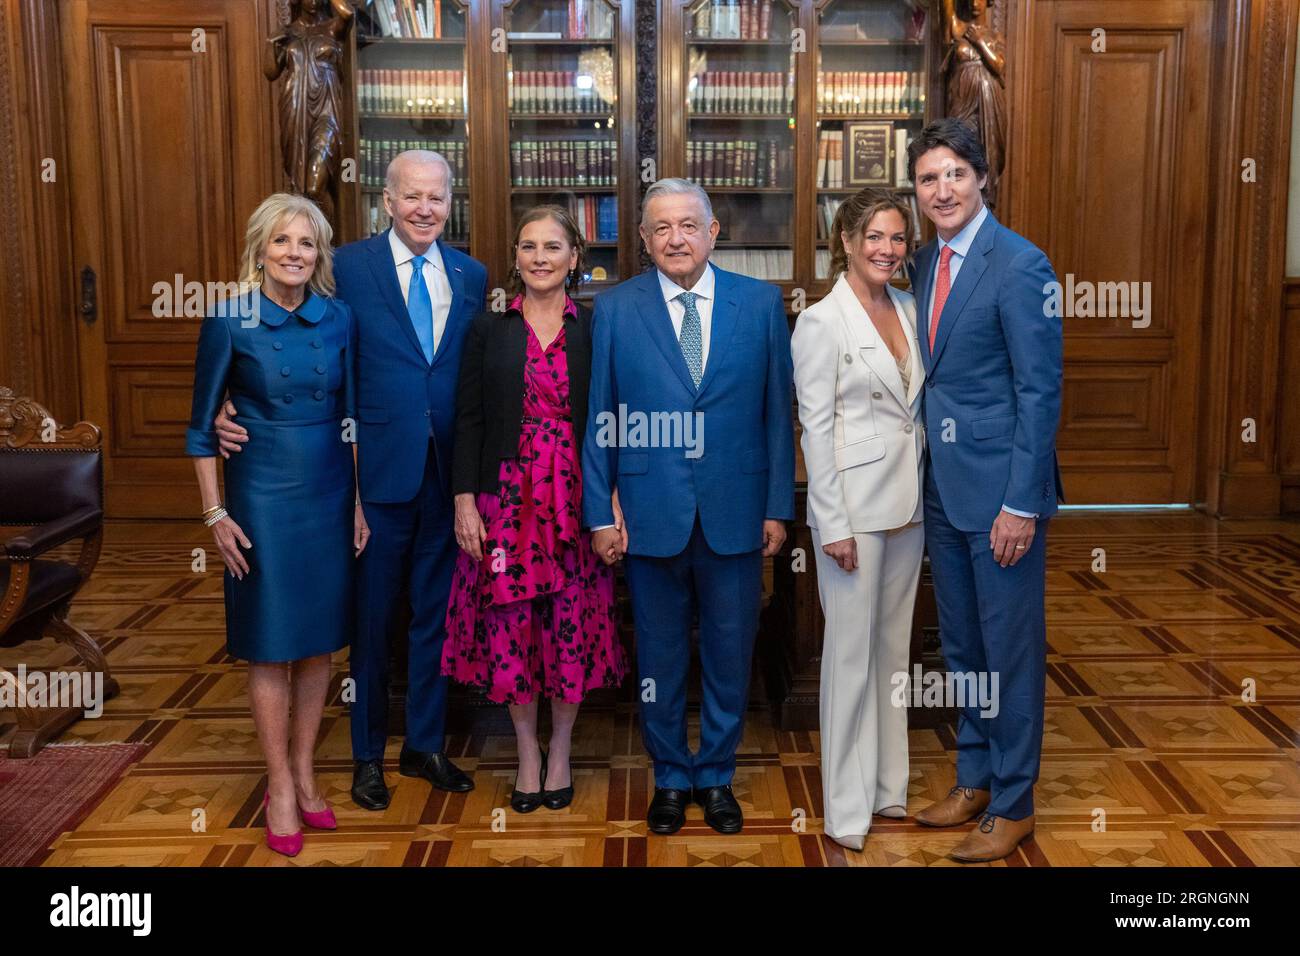 Reportage: Joe Biden, along with wife Jill Biden, visit Mexico City (January 2023) - President Joe Biden and First Lady Jill Biden pose for photos with Mexican President Andres Manuel Lopez Obrador, his wife Dr. Beatriz Gutiérrez Müller, Canadian Prime Minister Justin Trudeau and his wife Sophie Gregoire Trudeau, Tuesday, January 10, 2023, in the President’s Office at the National Palace in Mexico City. Stock Photo